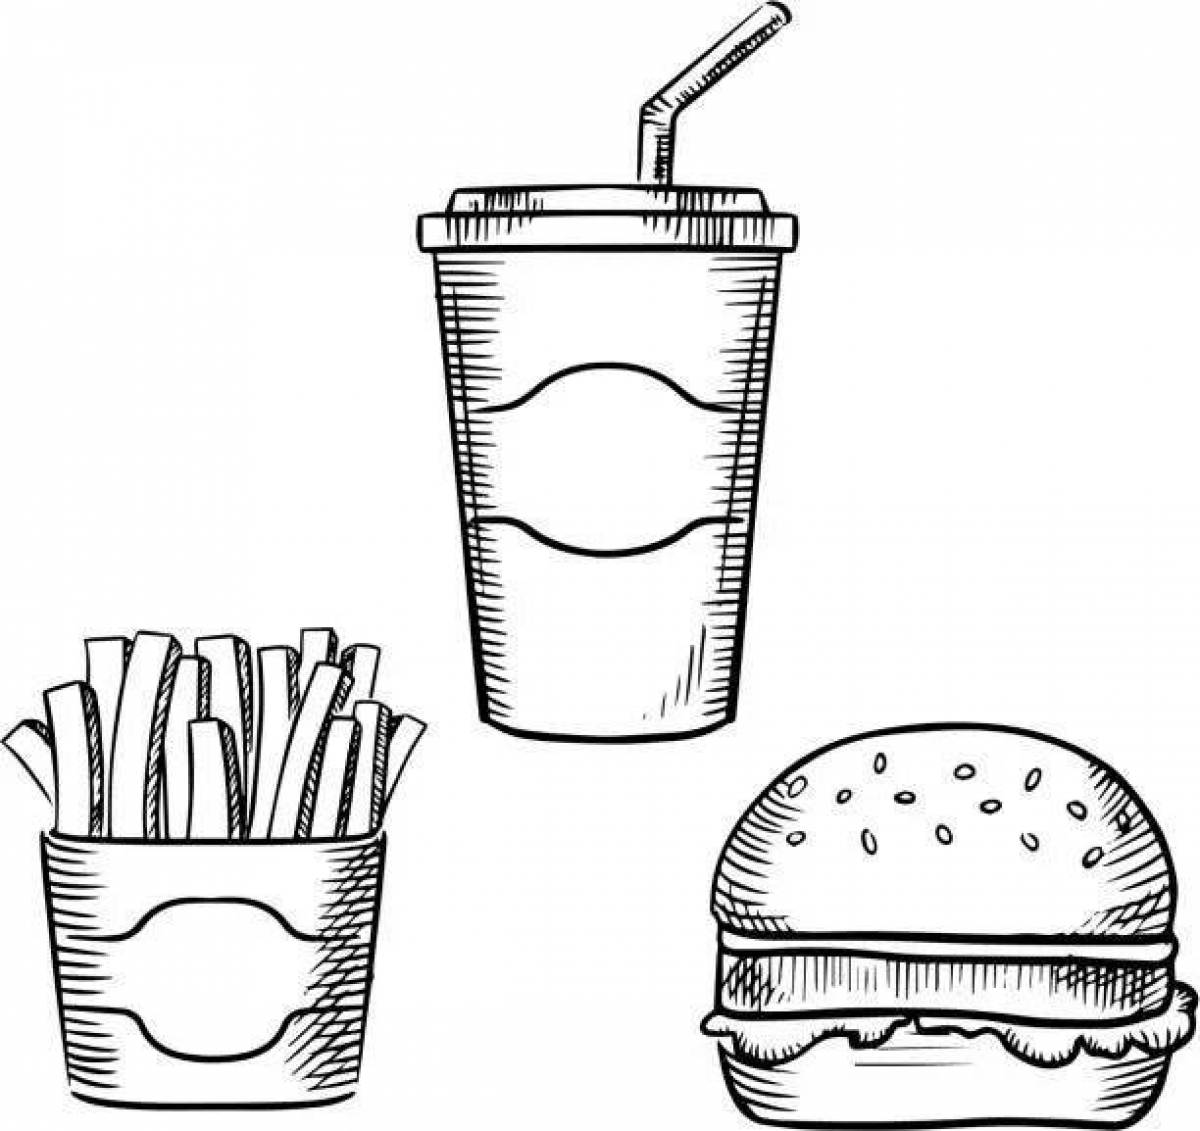 Nutritious burger and fries coloring page